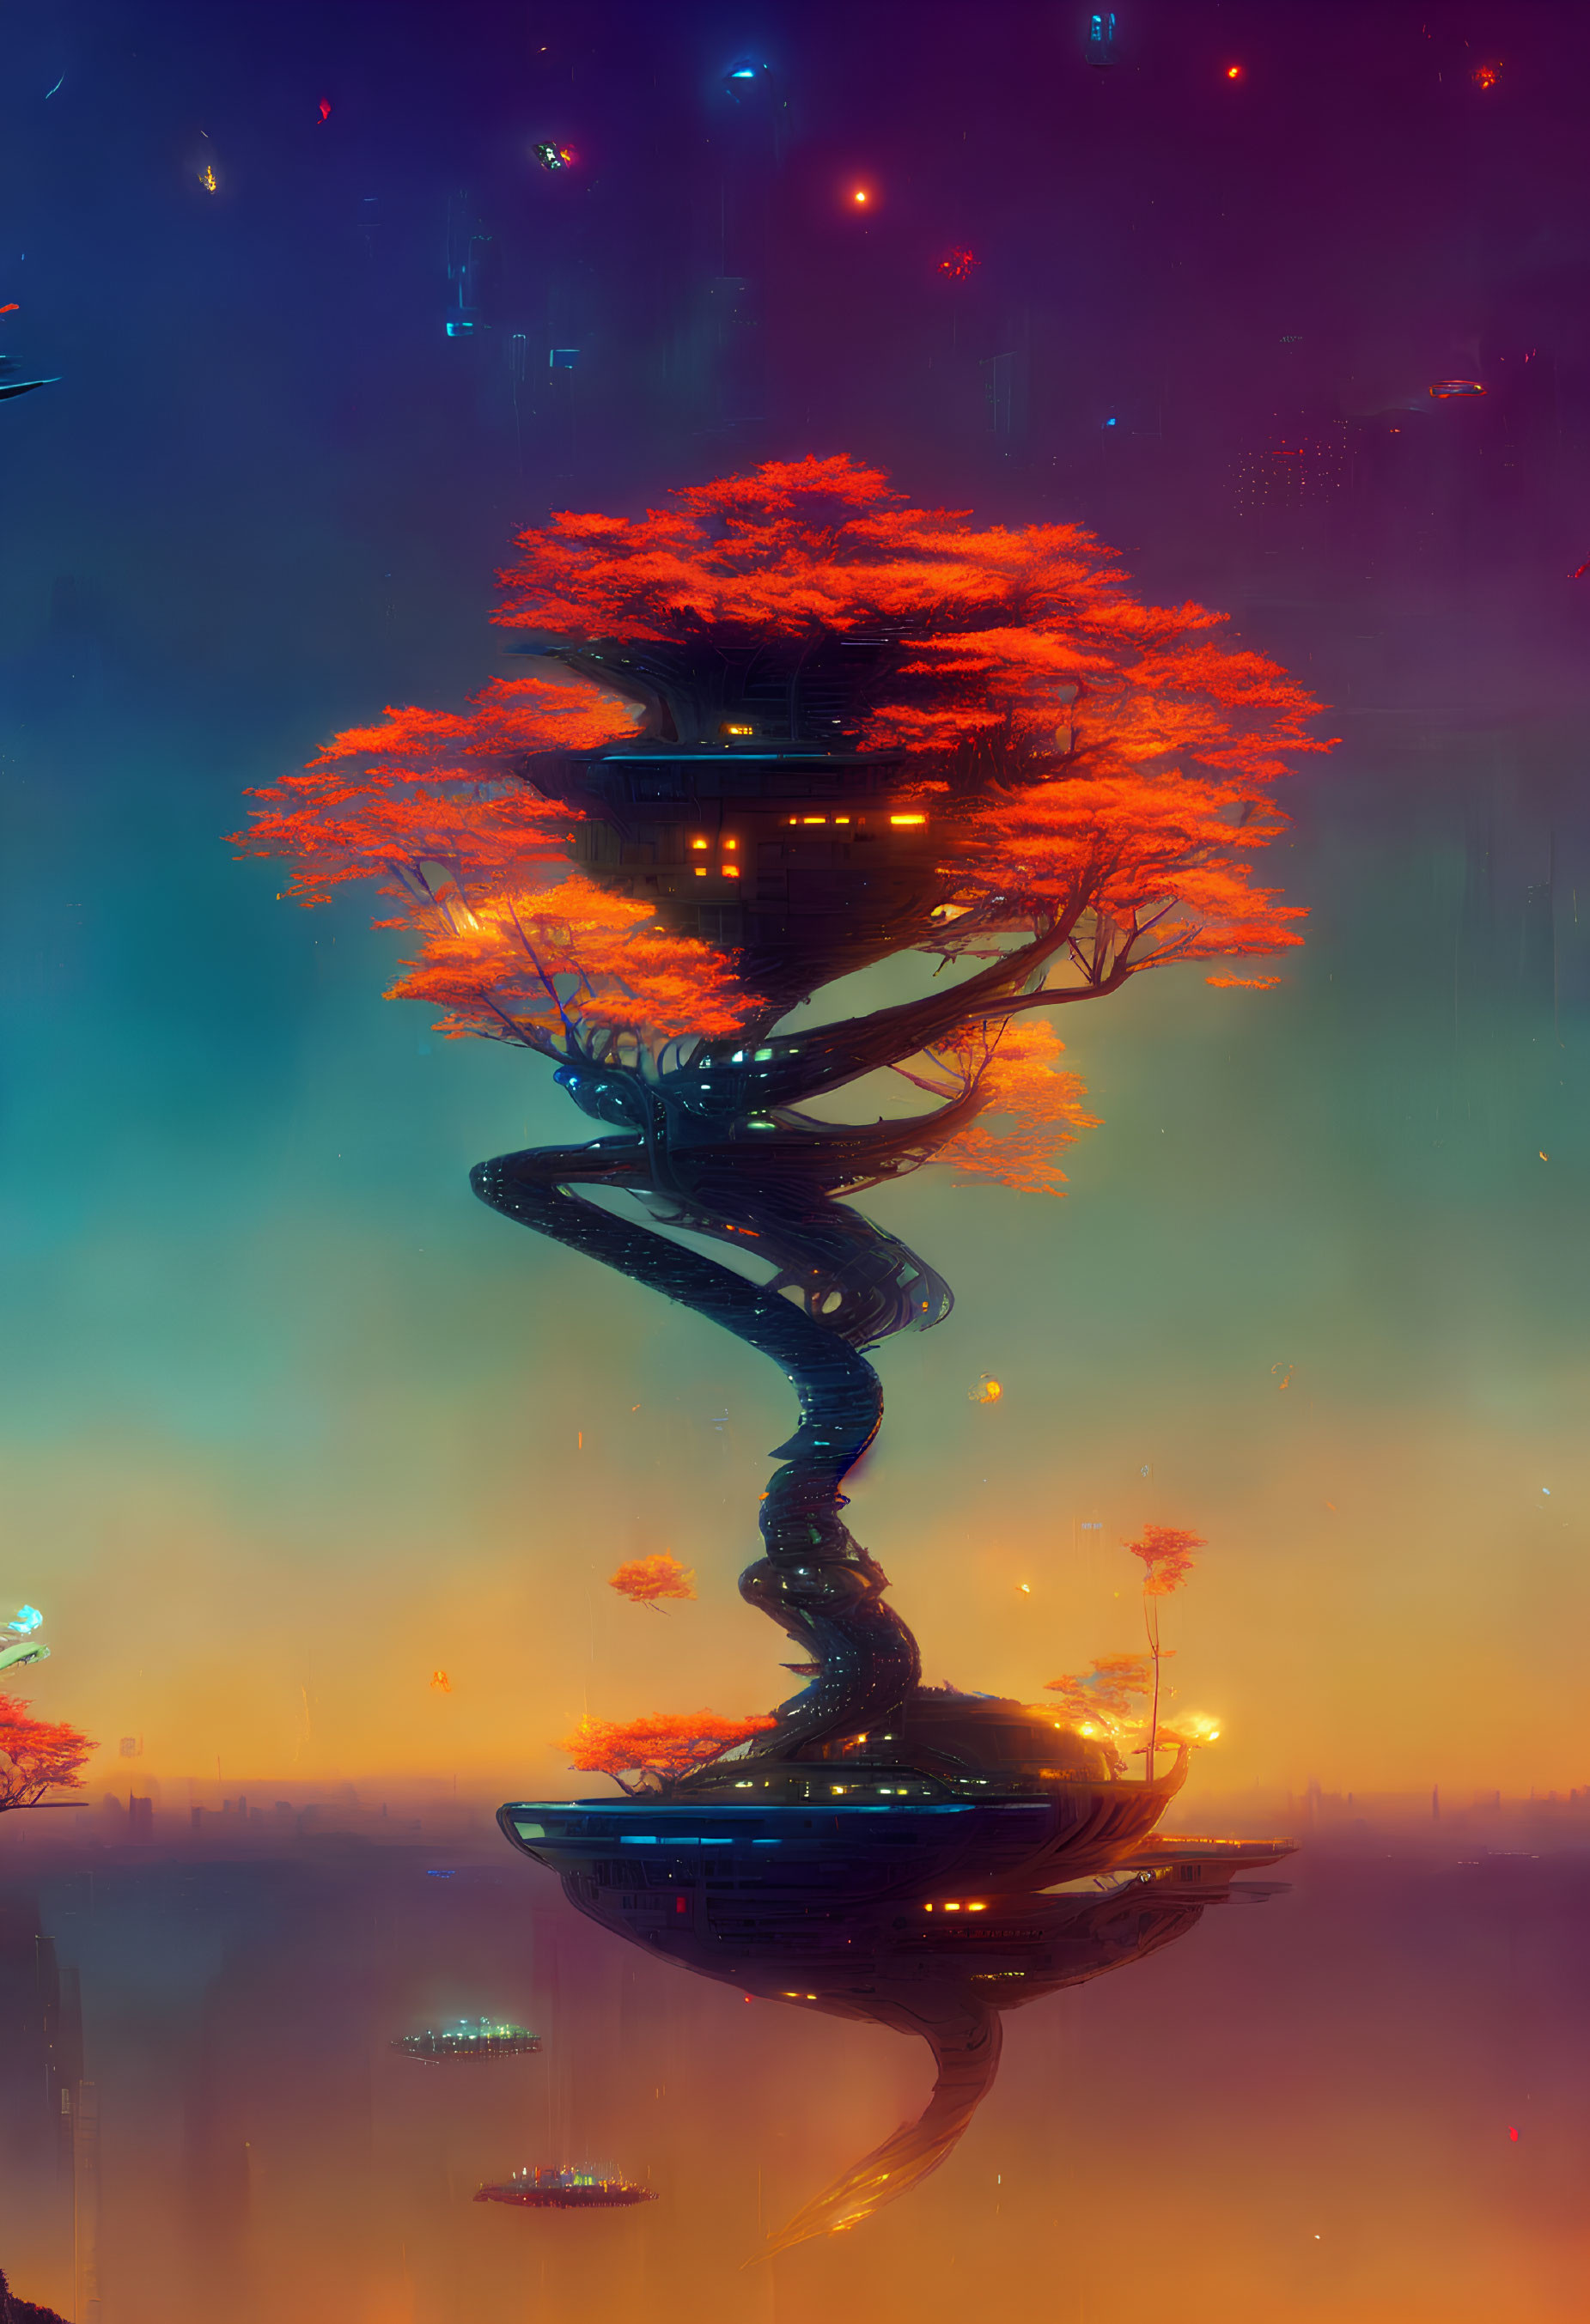 Spiral structure with glowing trees in neon-lit mystical scene